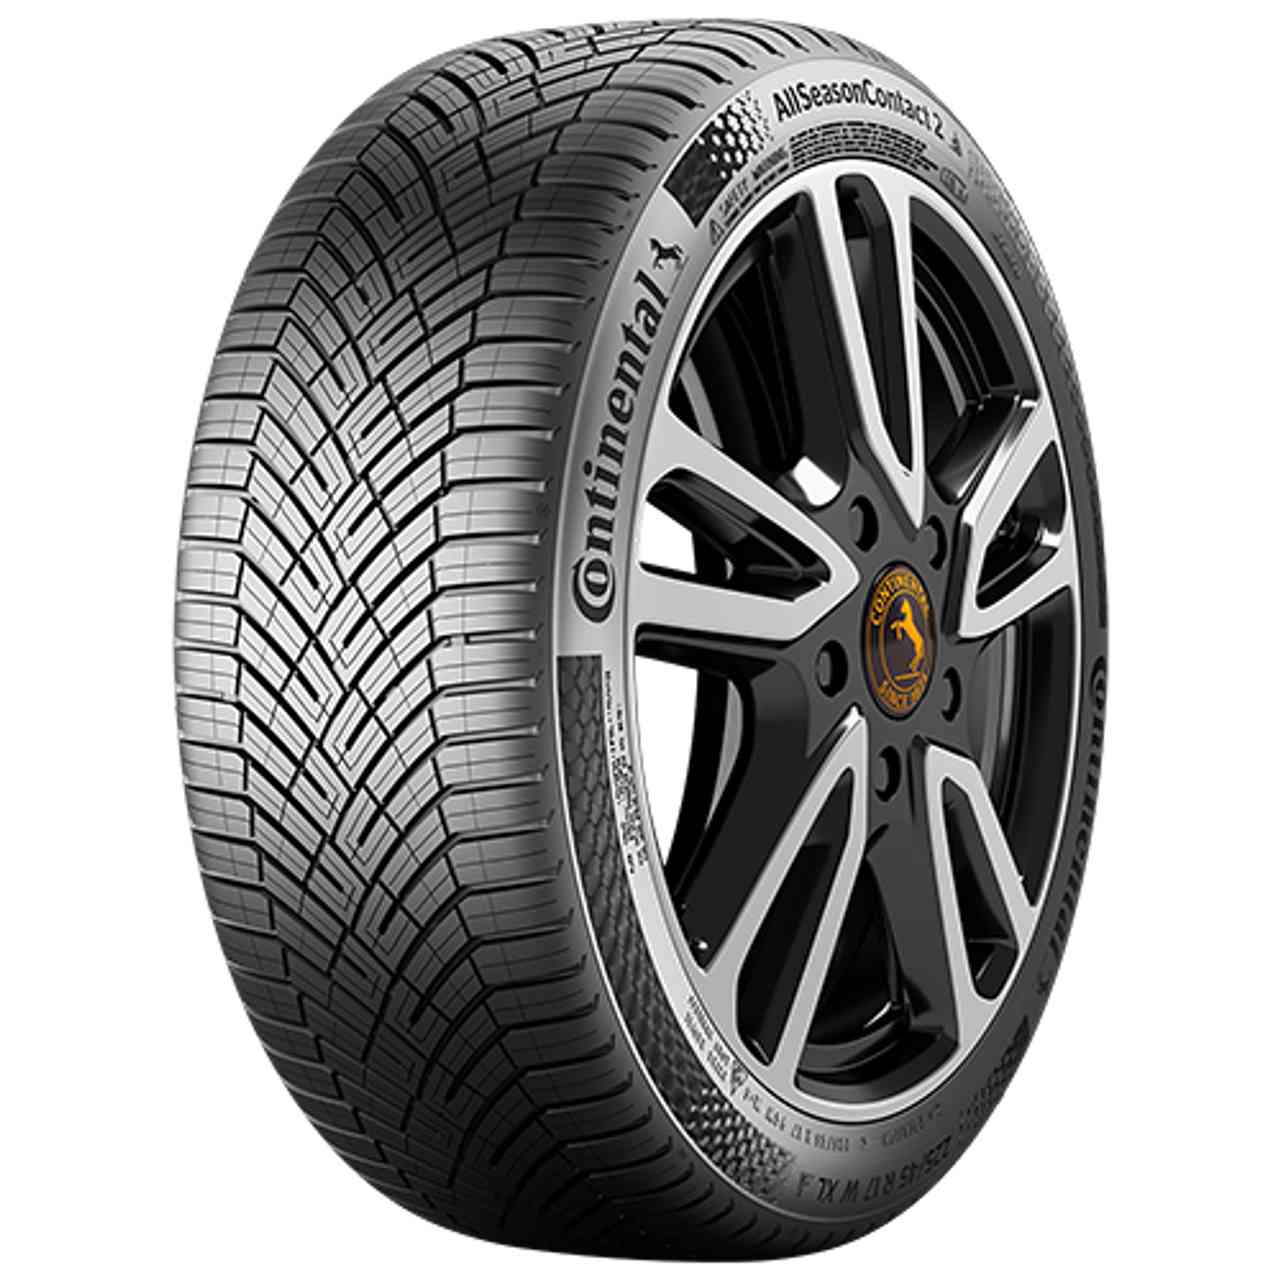 CONTINENTAL ALLSEASONCONTACT 2 (EVc) 185/60R15 88H BSW XL